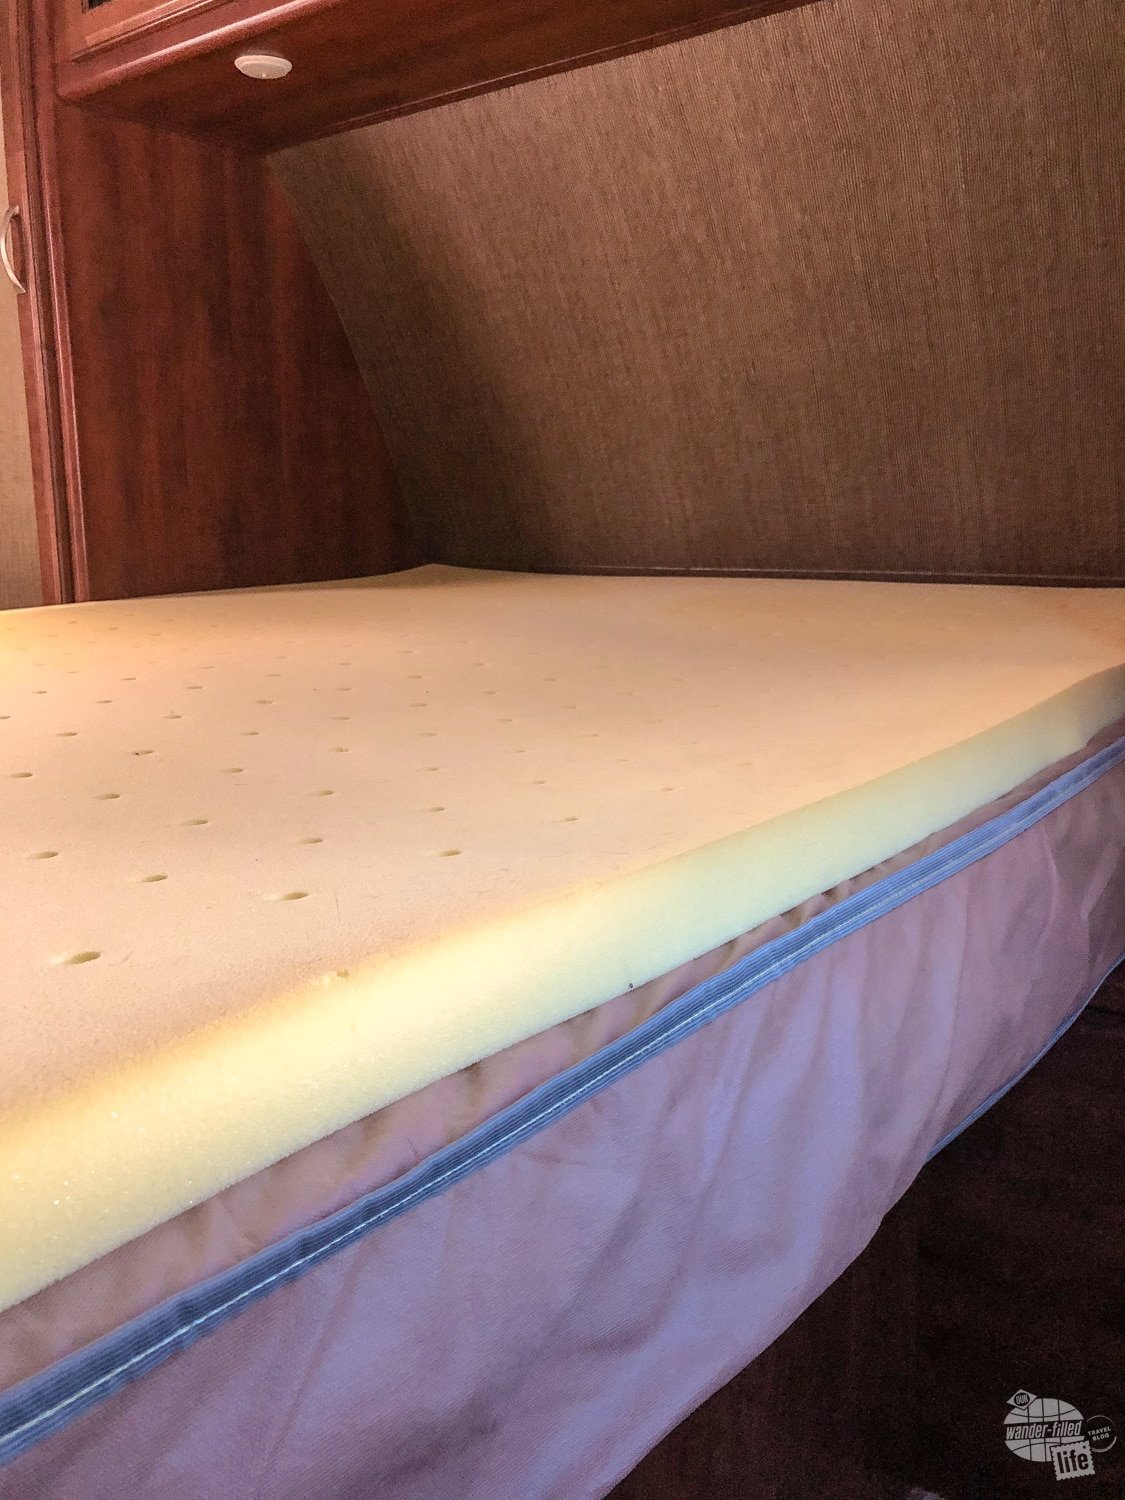 The mattress topper saved our backs for a couple years.